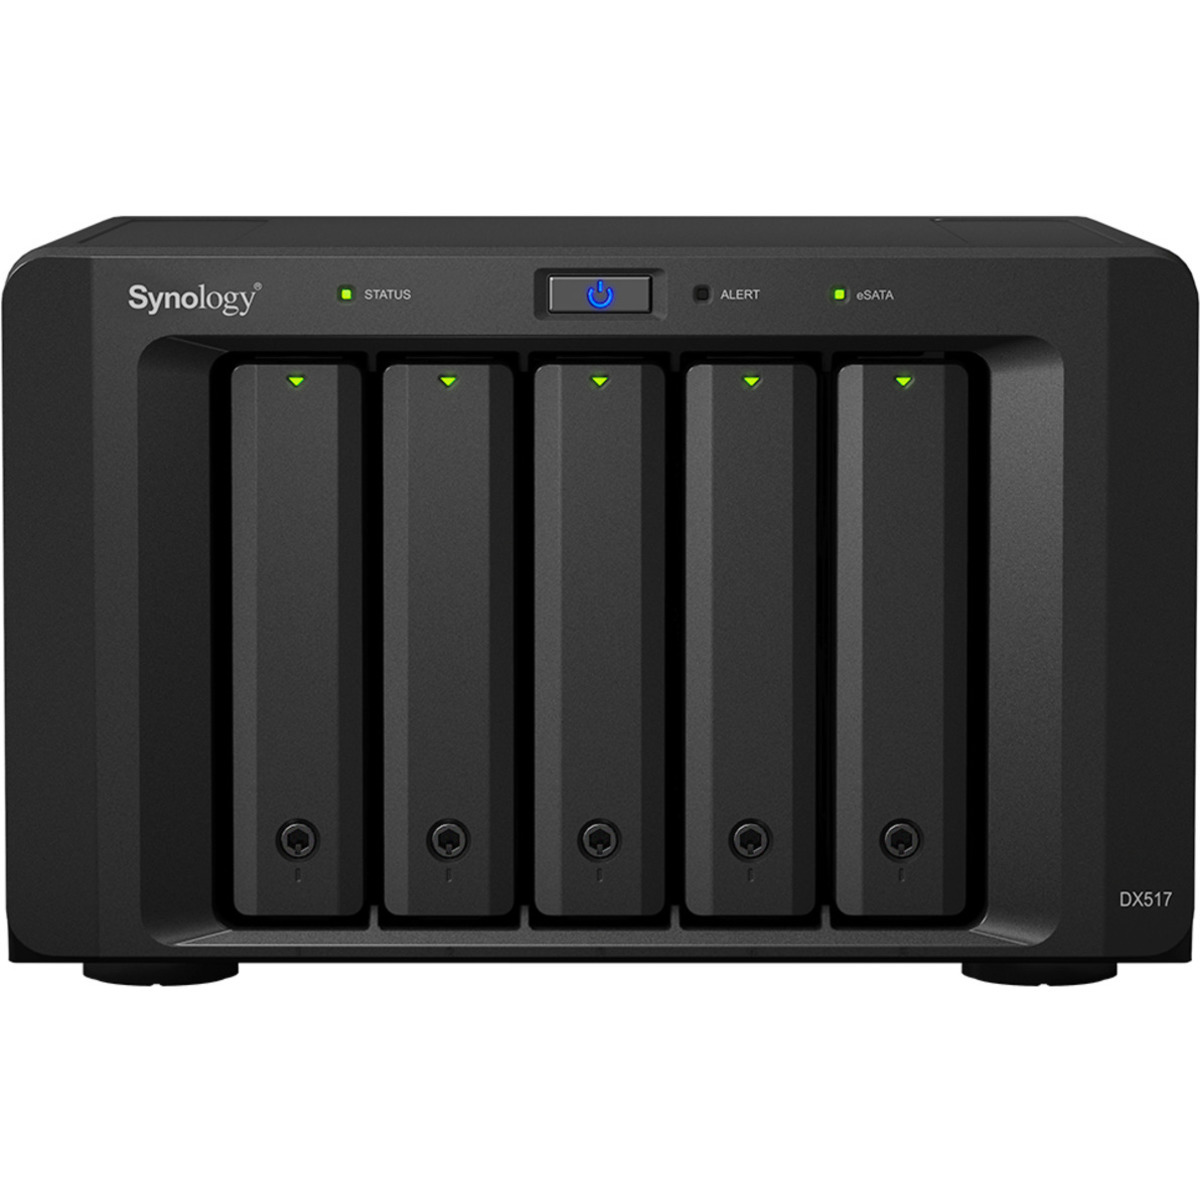 buy Synology DX517 Desktop Expansion Enclosure Burn-In Tested Configurations - nas headquarters buy network attached storage server device das new raid-5 free shipping usa christmas new year holiday sale DX517